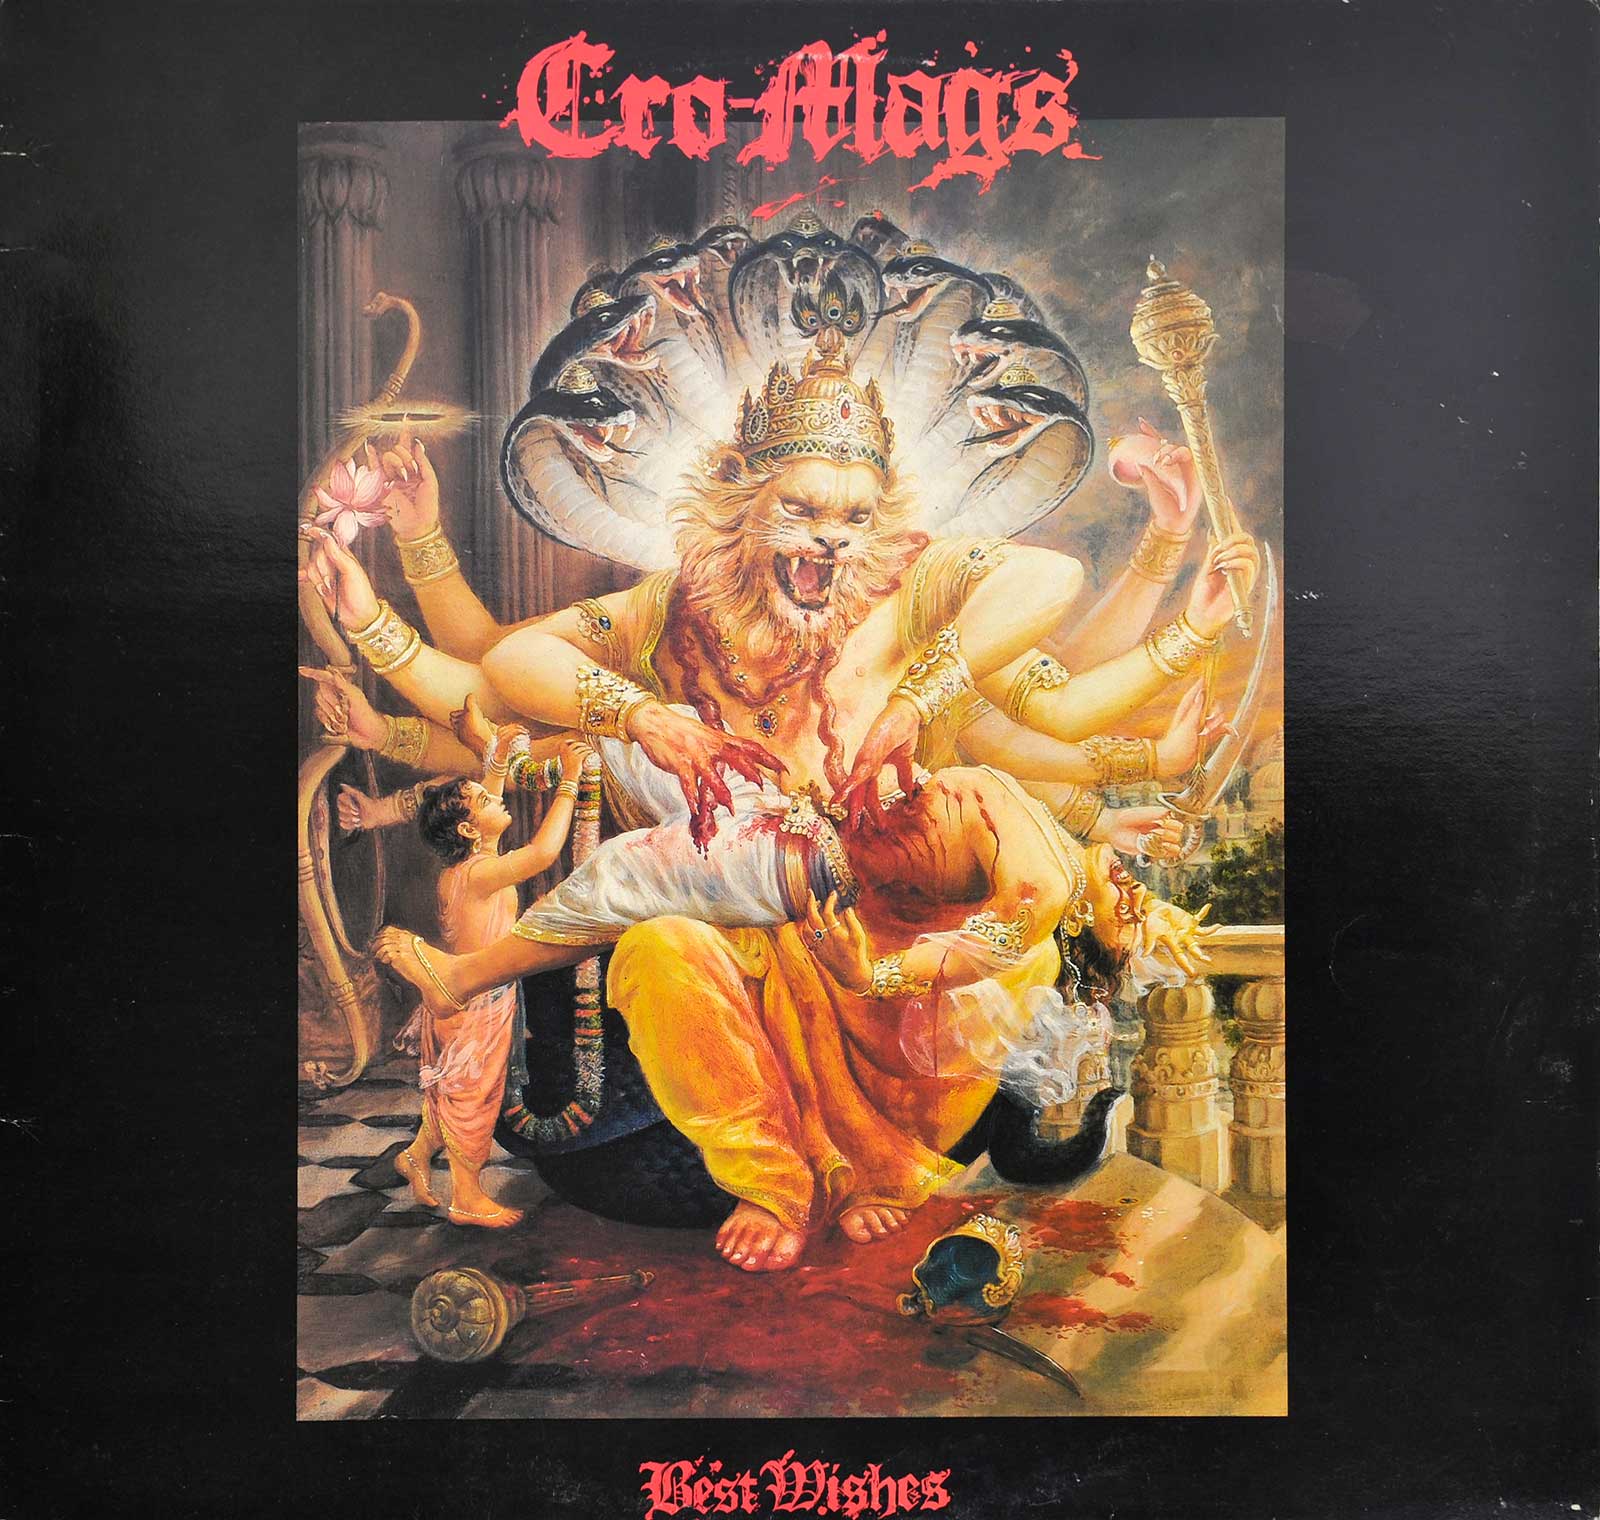 large album front cover photo of: cro-mags best wishes 